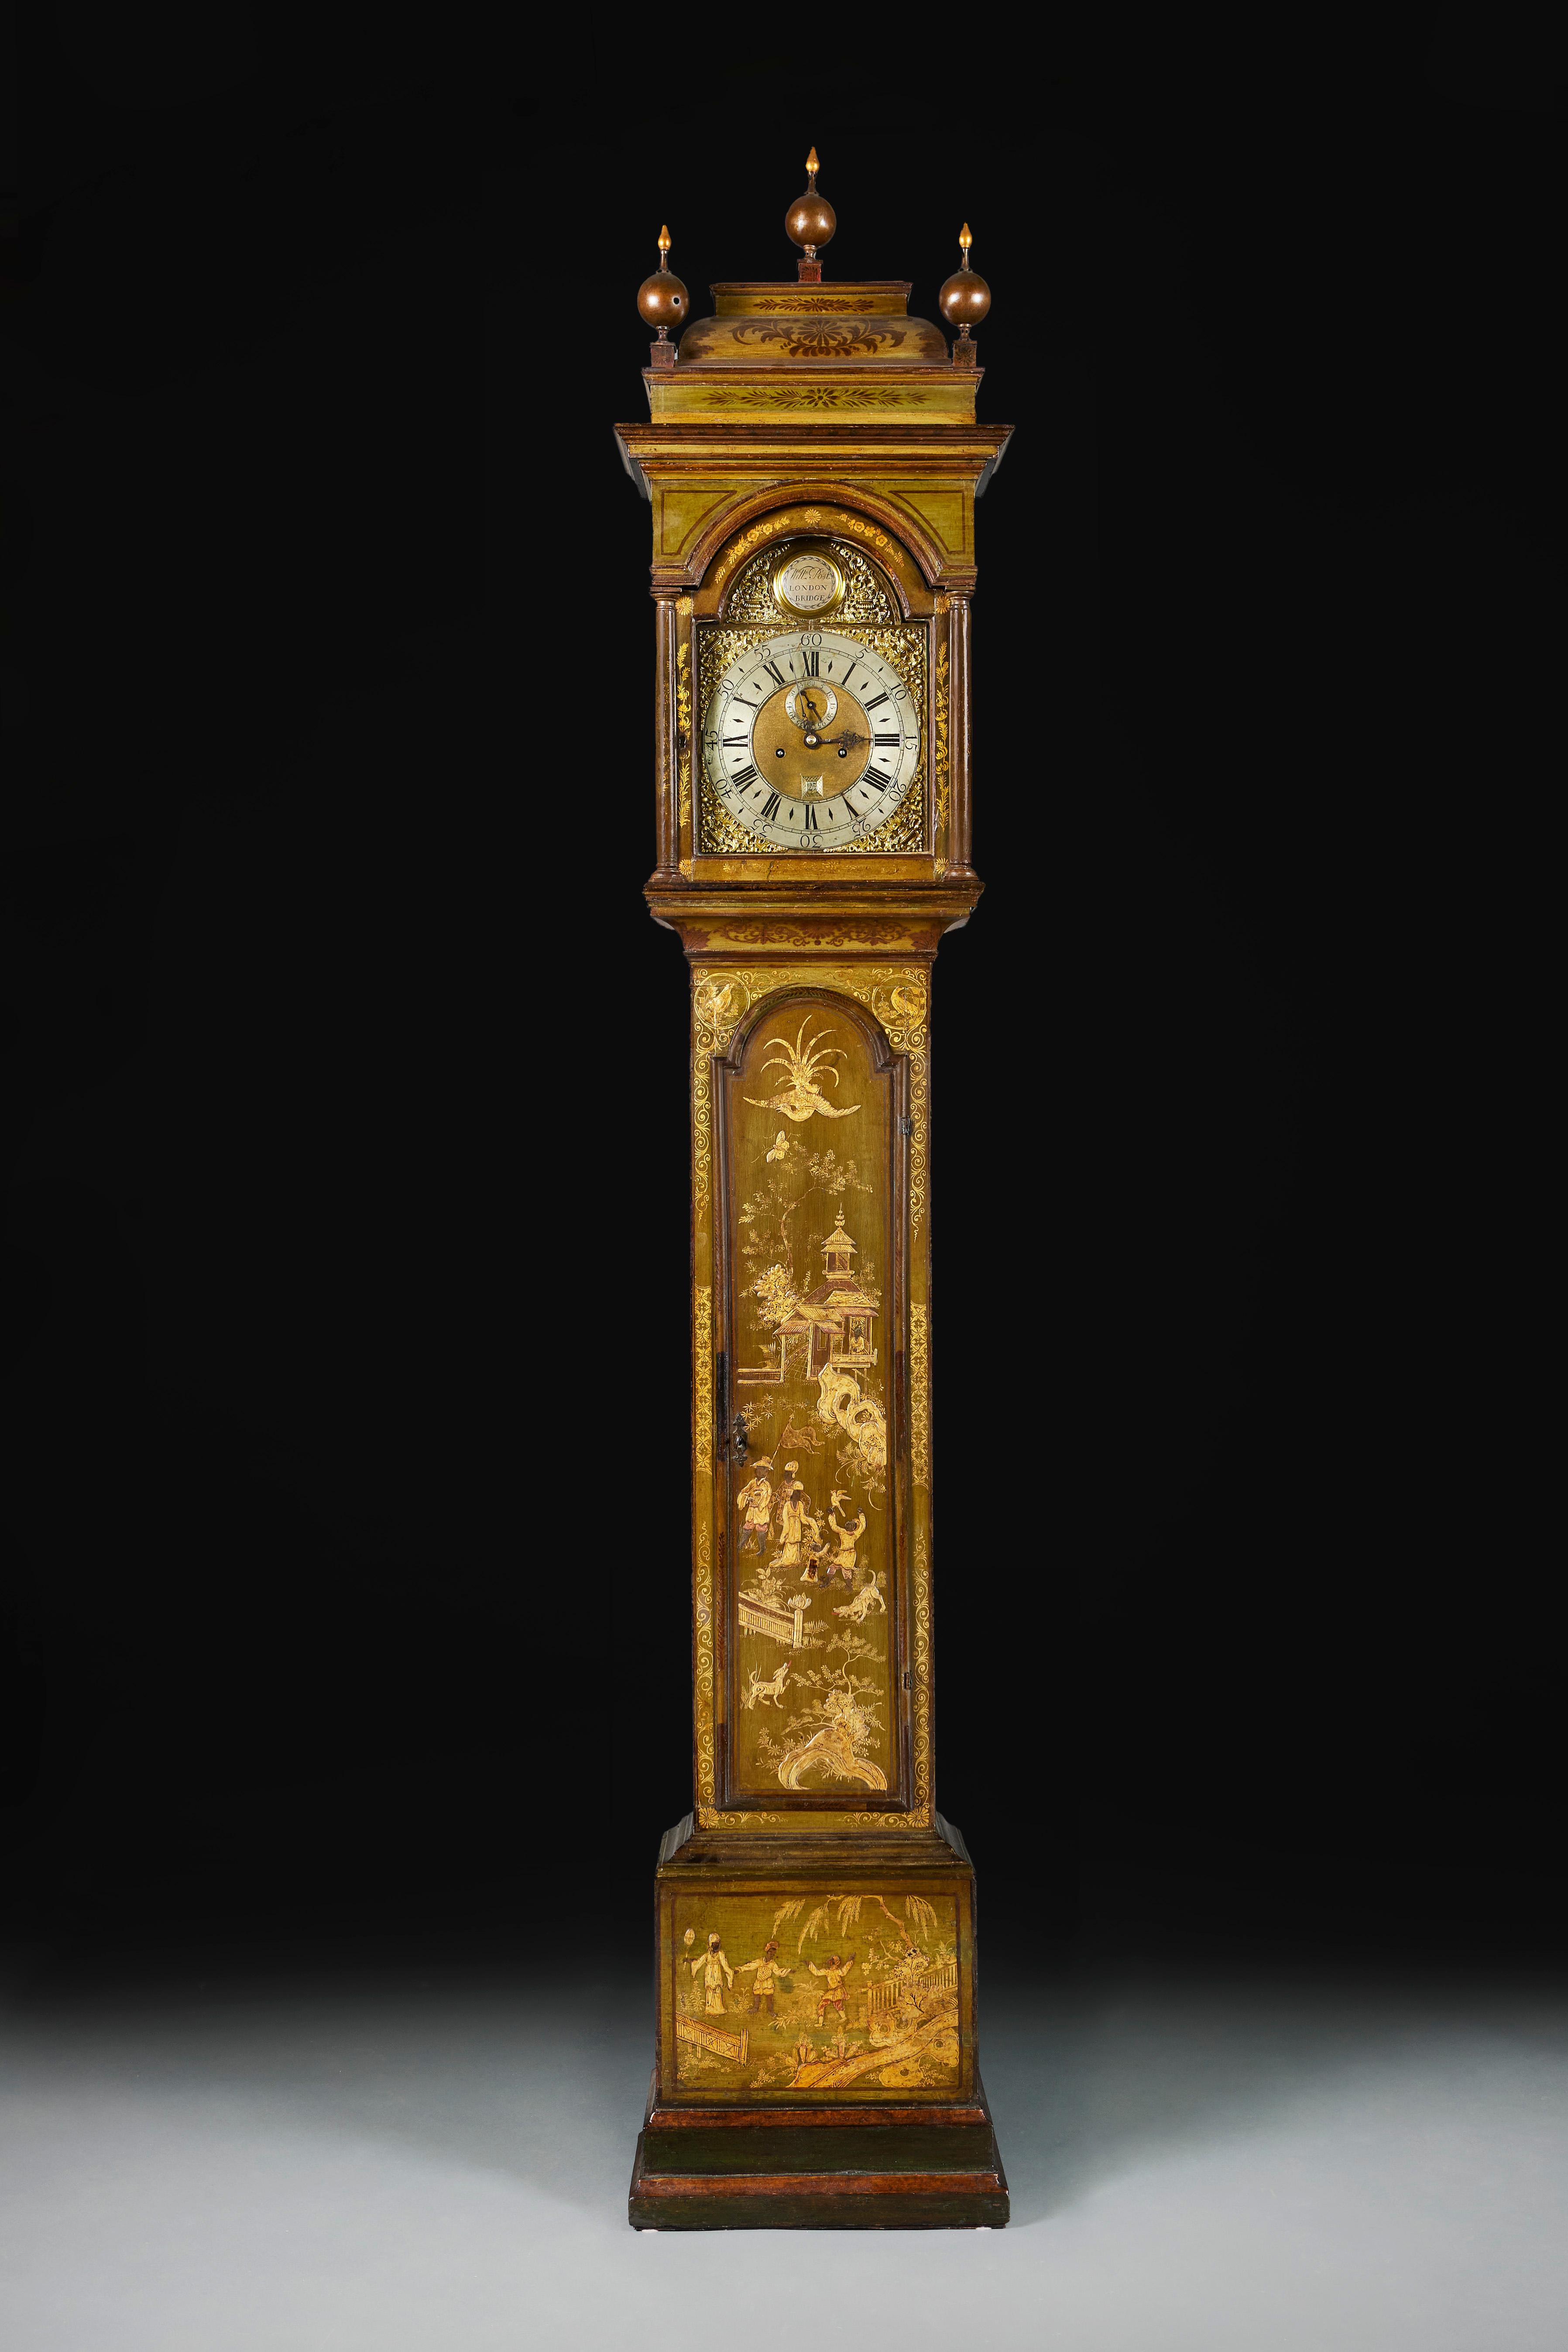 England, circa 1780

A mid-eighteenth century green japanned lacquer longcase clock, the case decorated with figures within a naturalistic setting surrounded by pagodas, birds, butterflies and dogs. The arched hood with three spherical finials